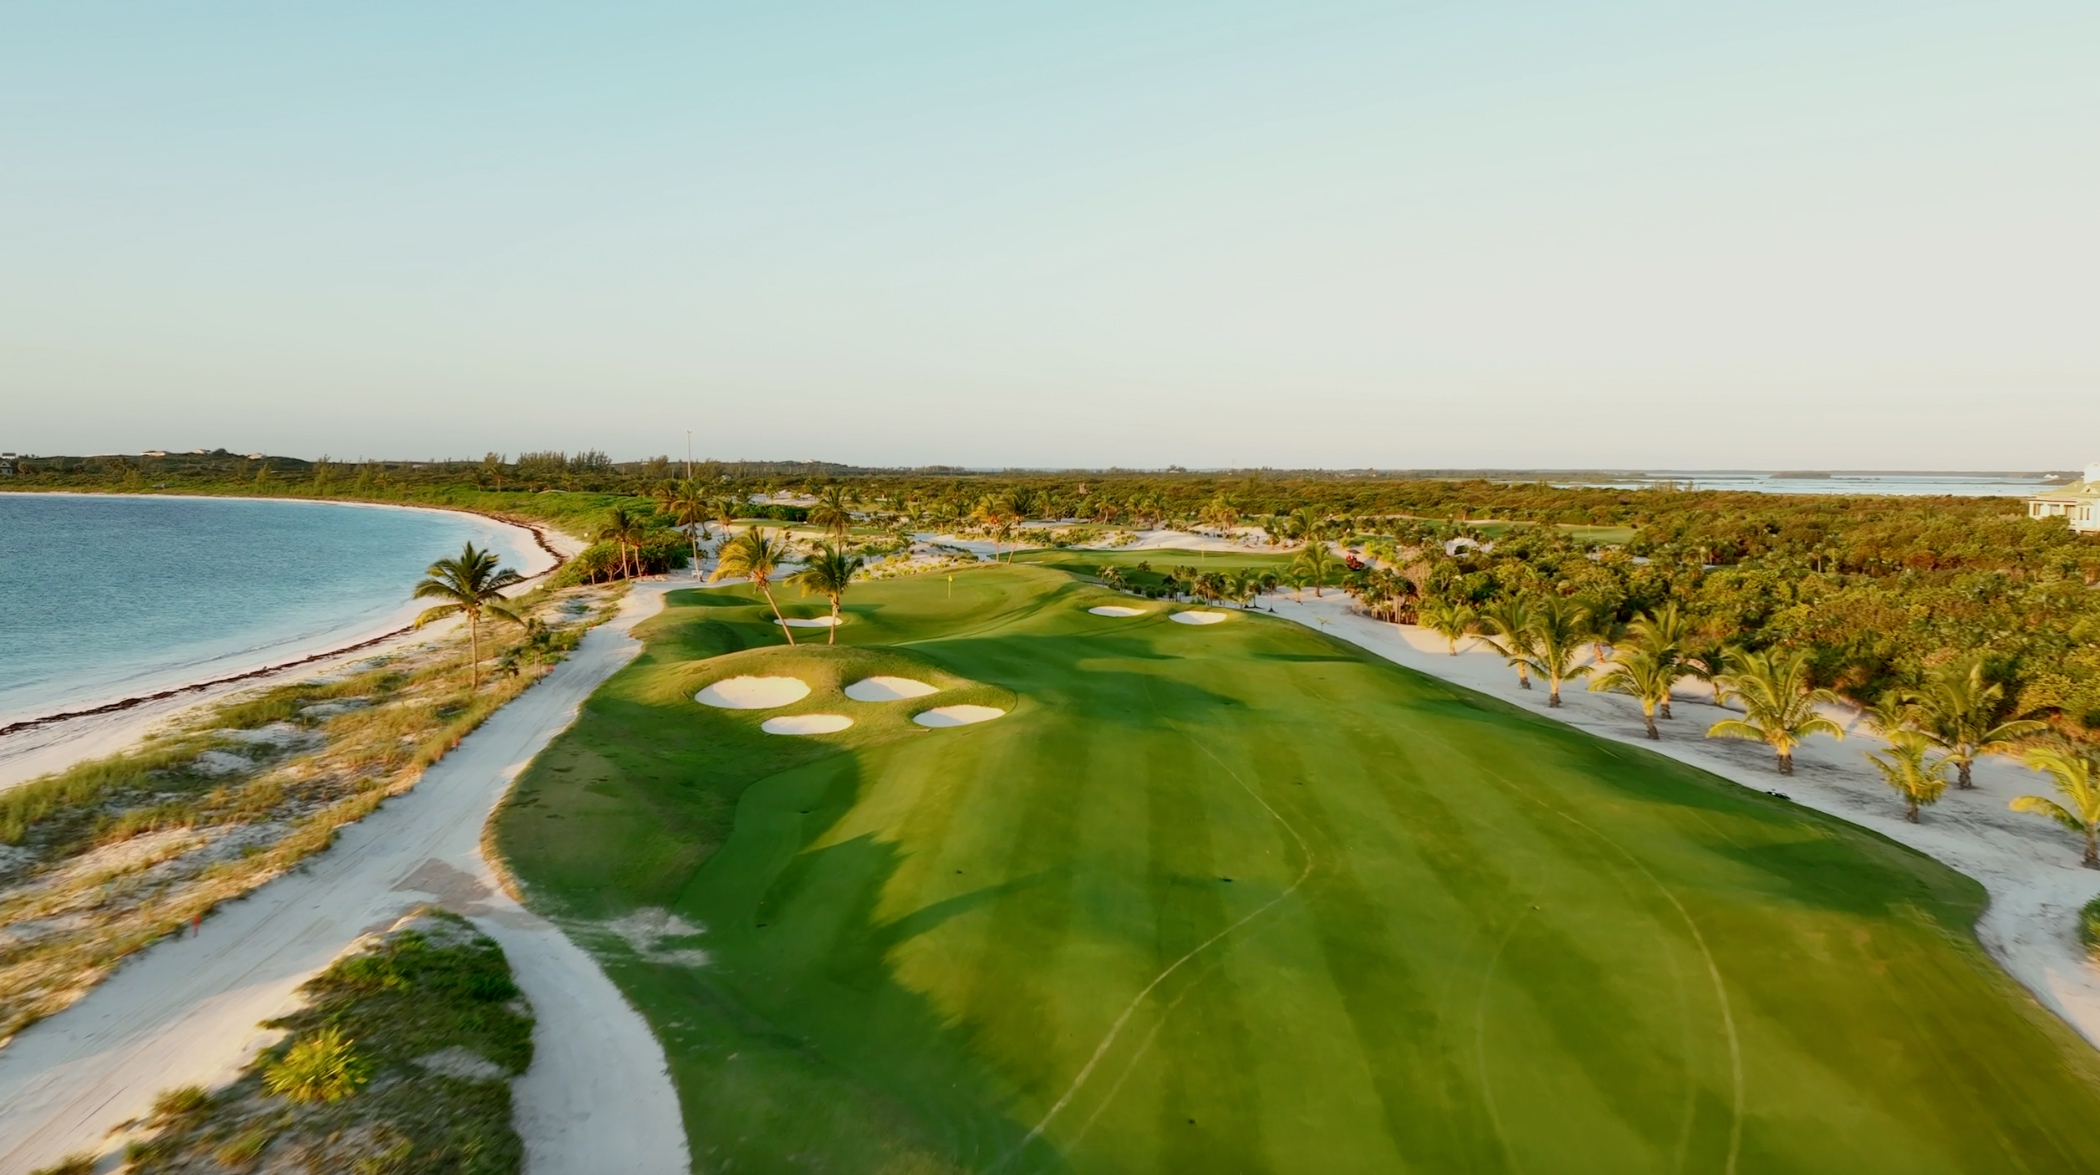 Aerial shot of Hole 5 from The Abaco Club golf course